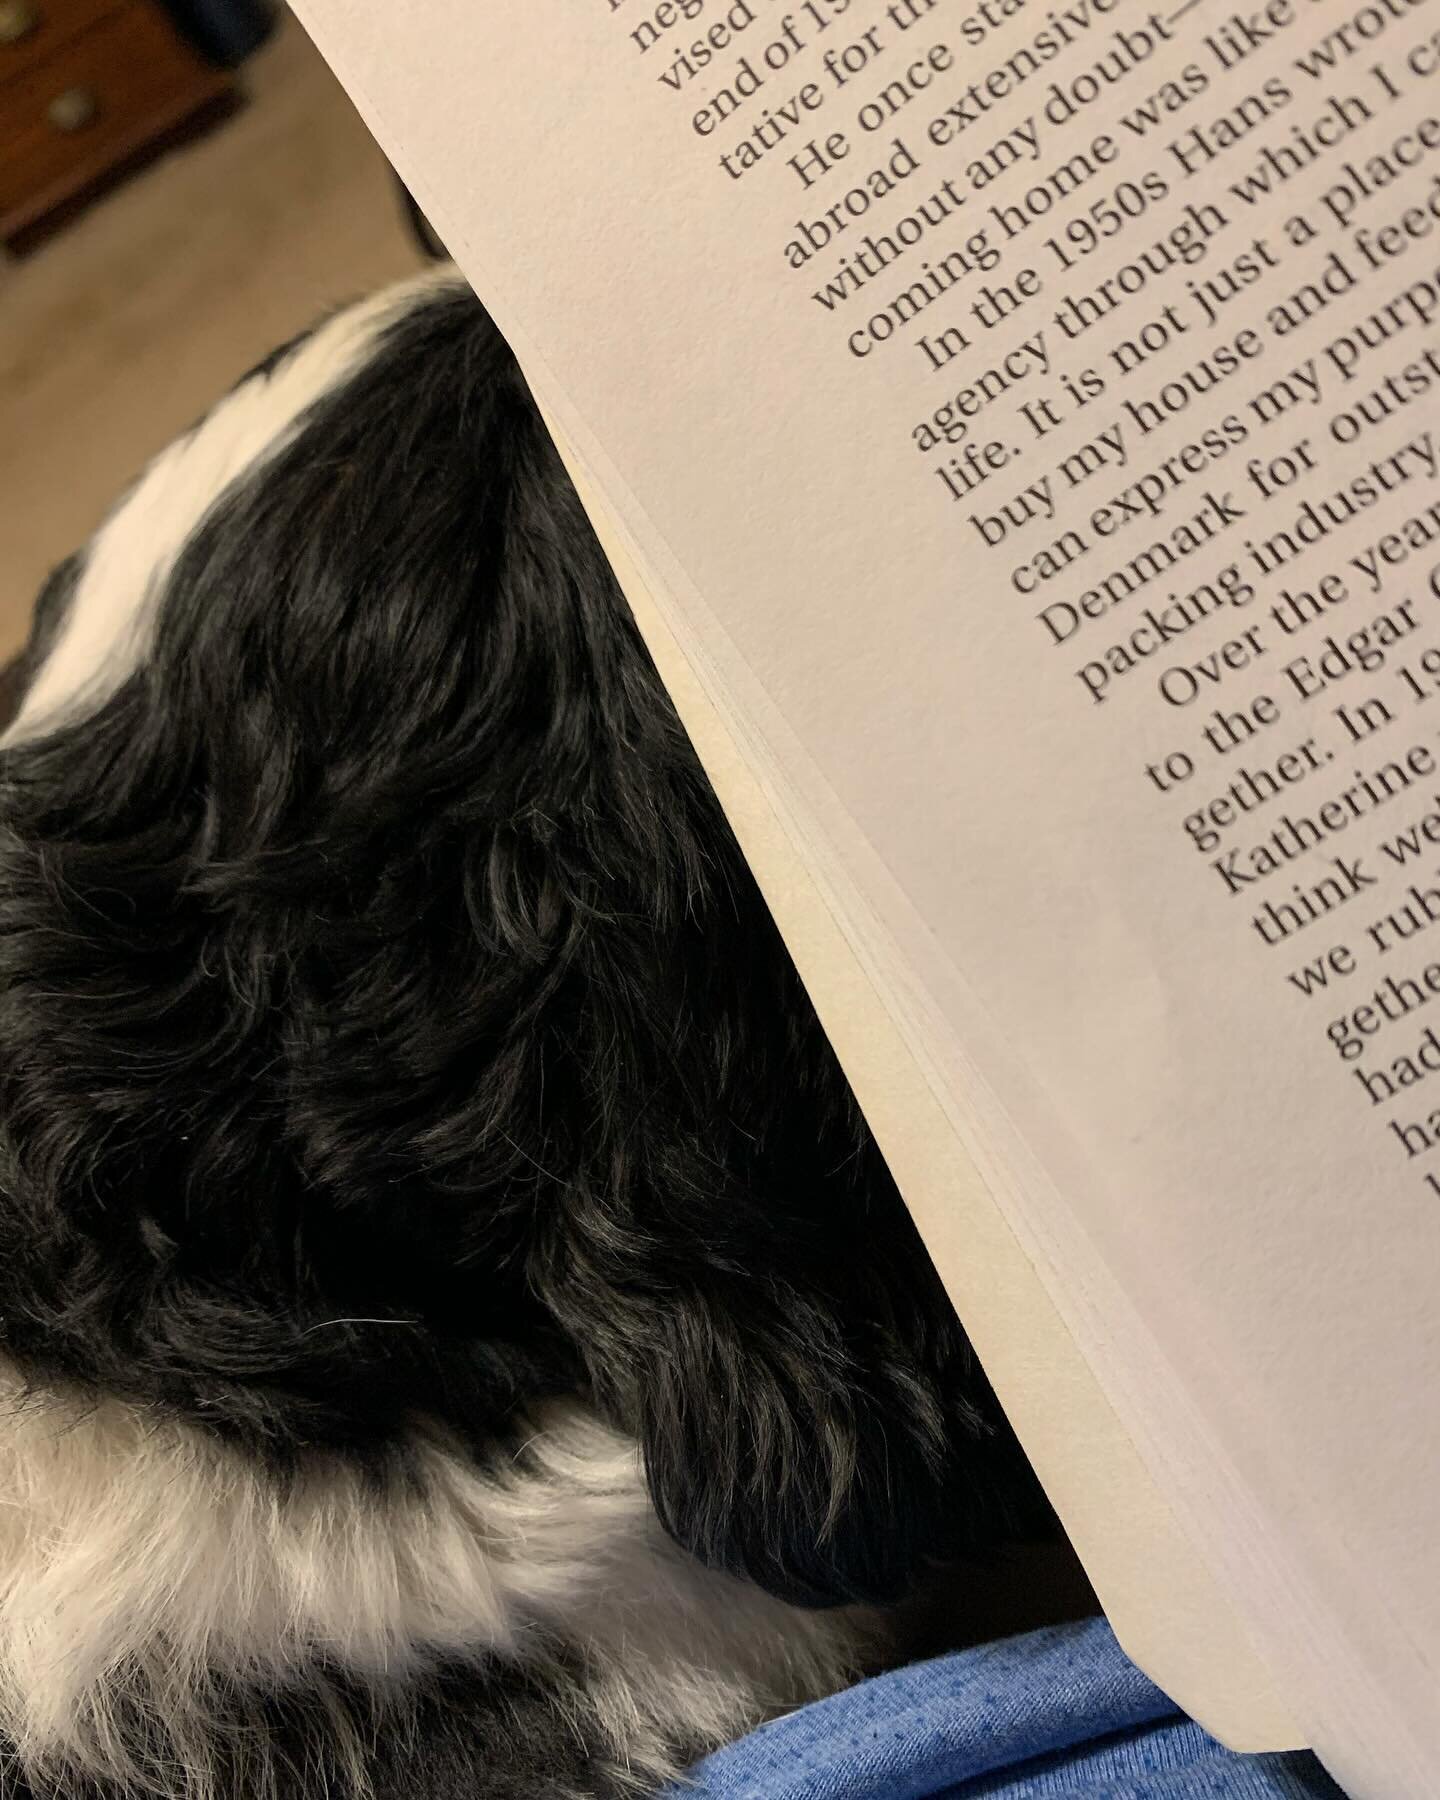 Pup in the lap and a book with a mug of Sleepytime tea. A good way to end a rainy day.